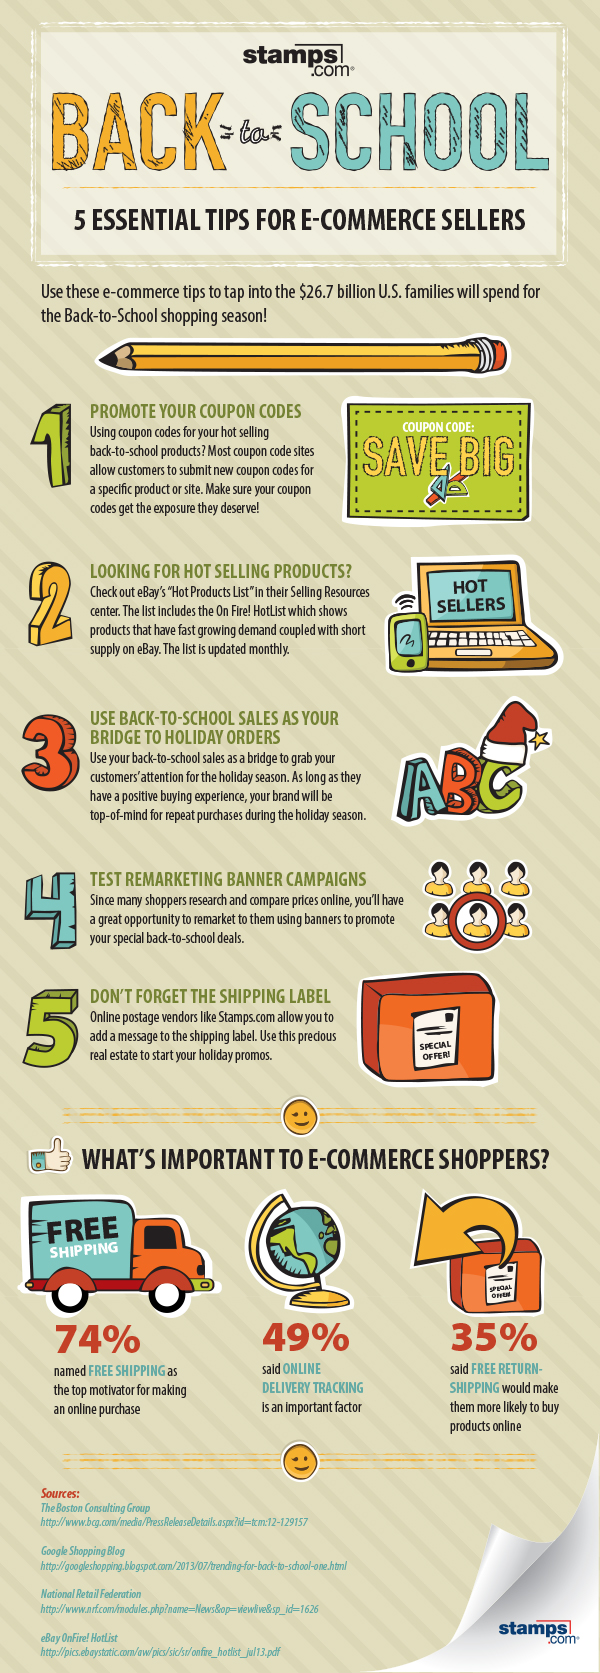 5 E-Commerce Tips for Back-to-School Selling [Infographic]